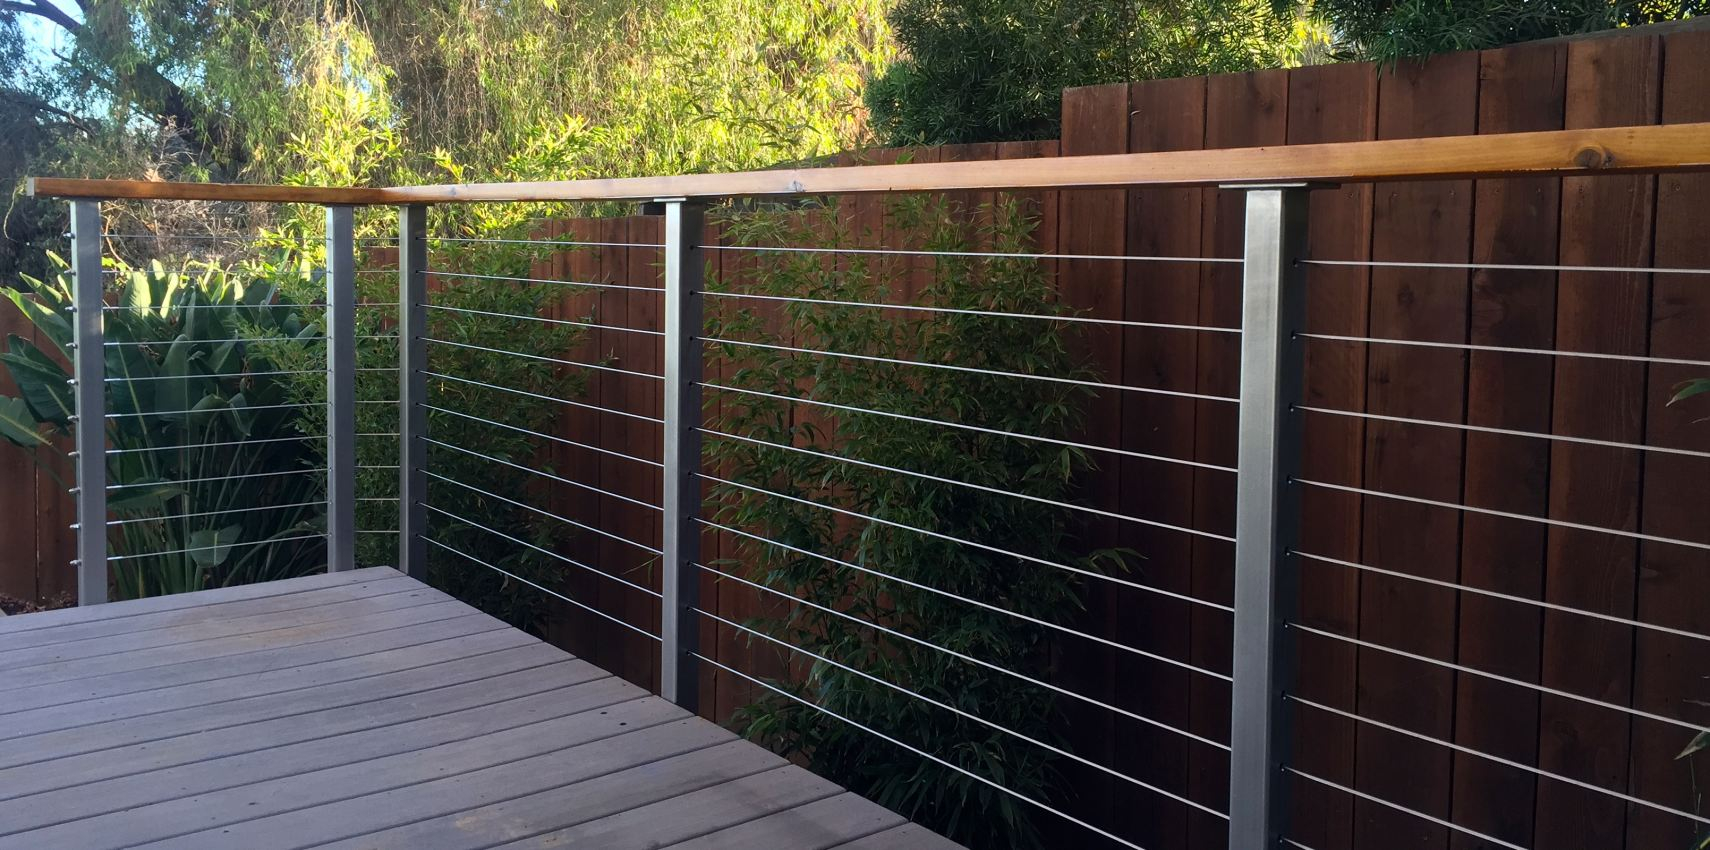 Stainless Steel Deck Railing Posts San Diego Cable Railings throughout dimensions 1710 X 850